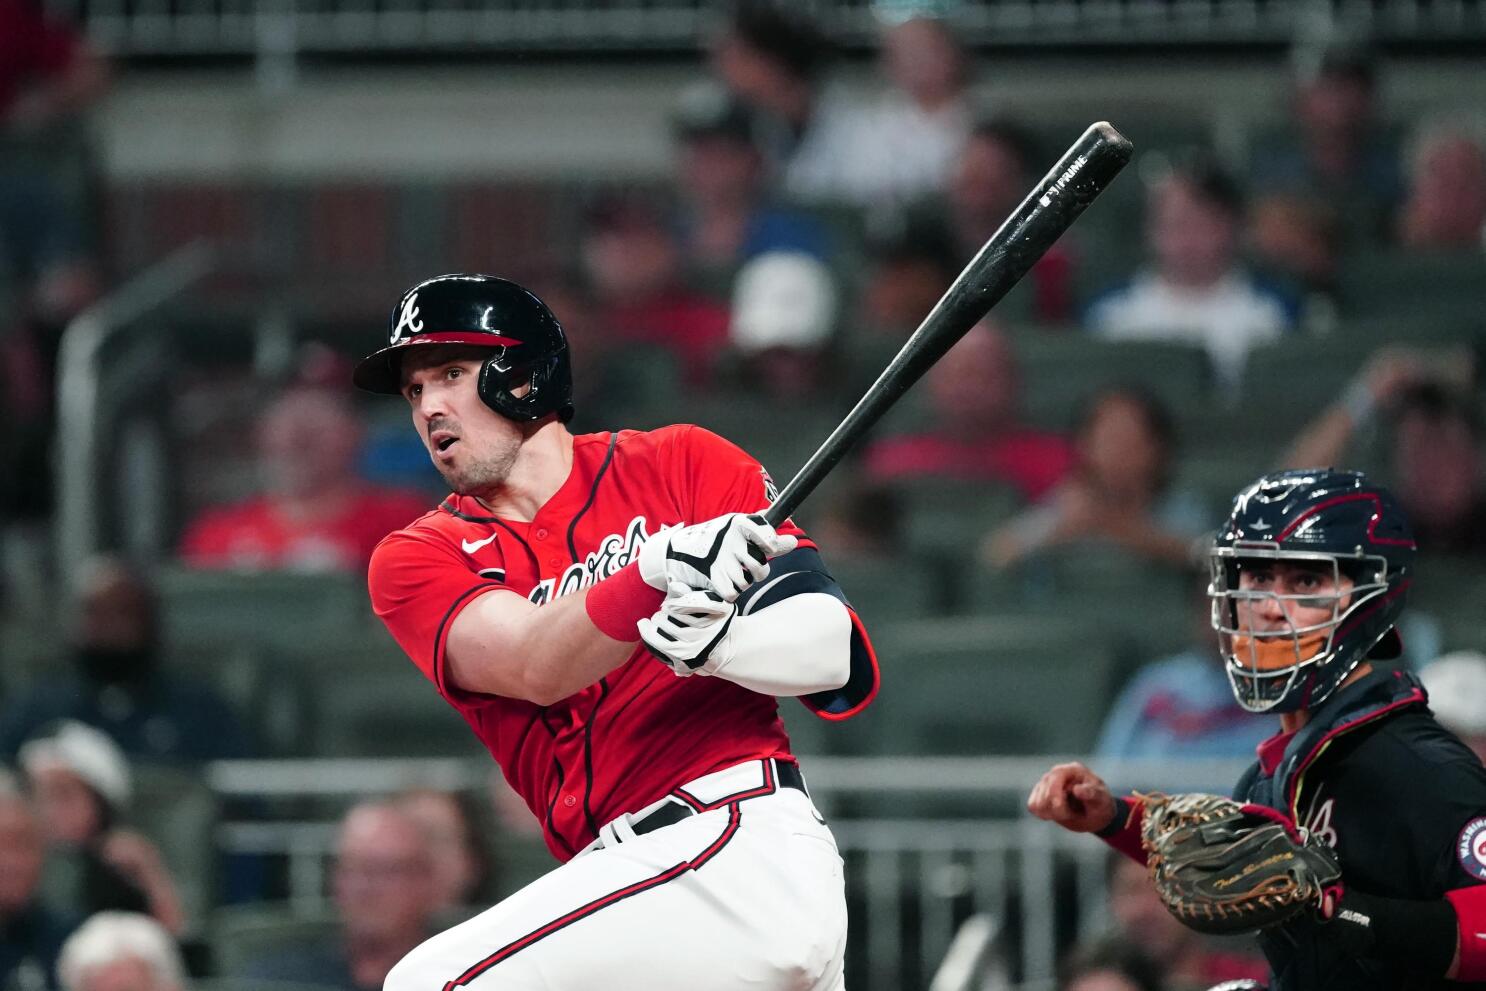 Duvall helps Braves beat Nats 8-4, move closer in NL East